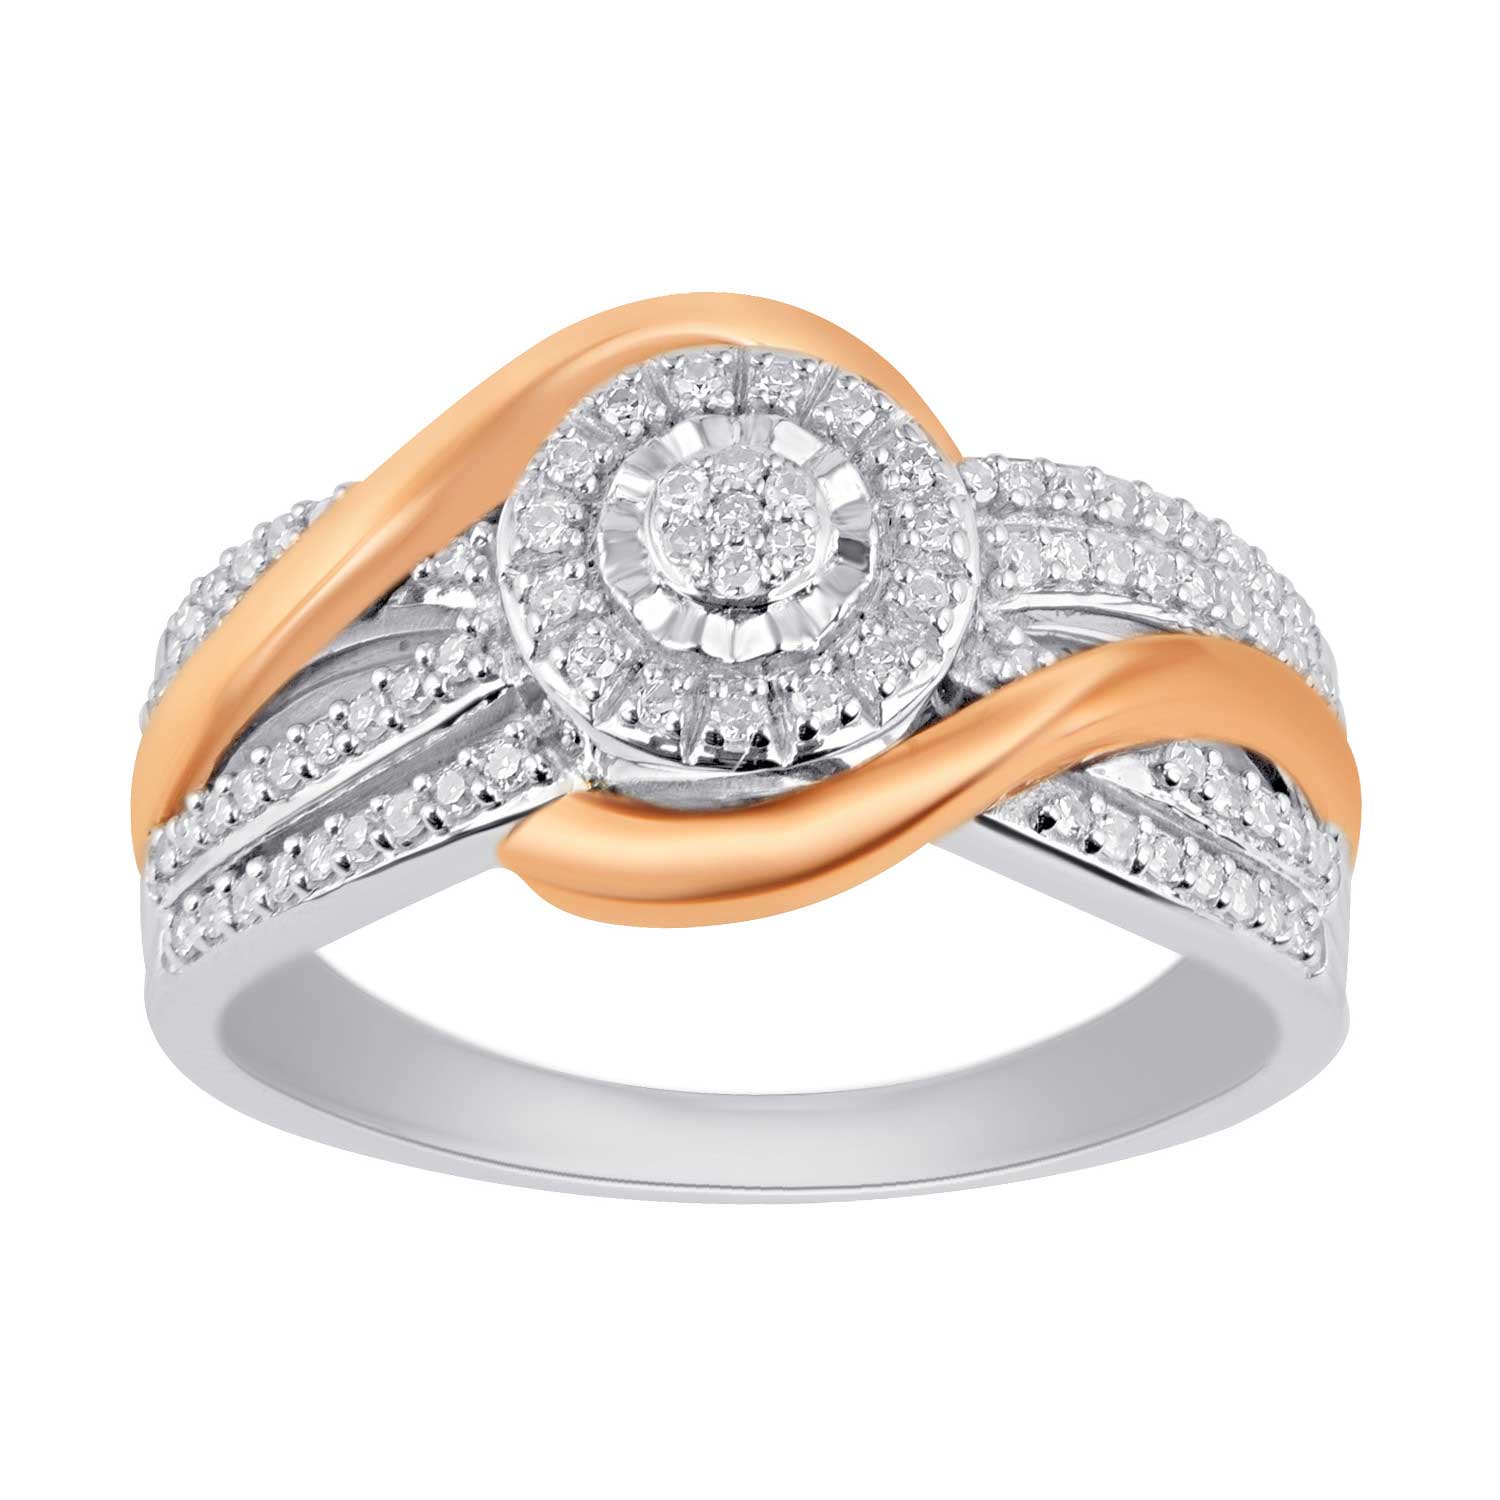 Mirage Halo Multi Crossover Ring with 1/4ct of Diamonds in Sterling Silver and 9ct Rose Gold Rings Bevilles 